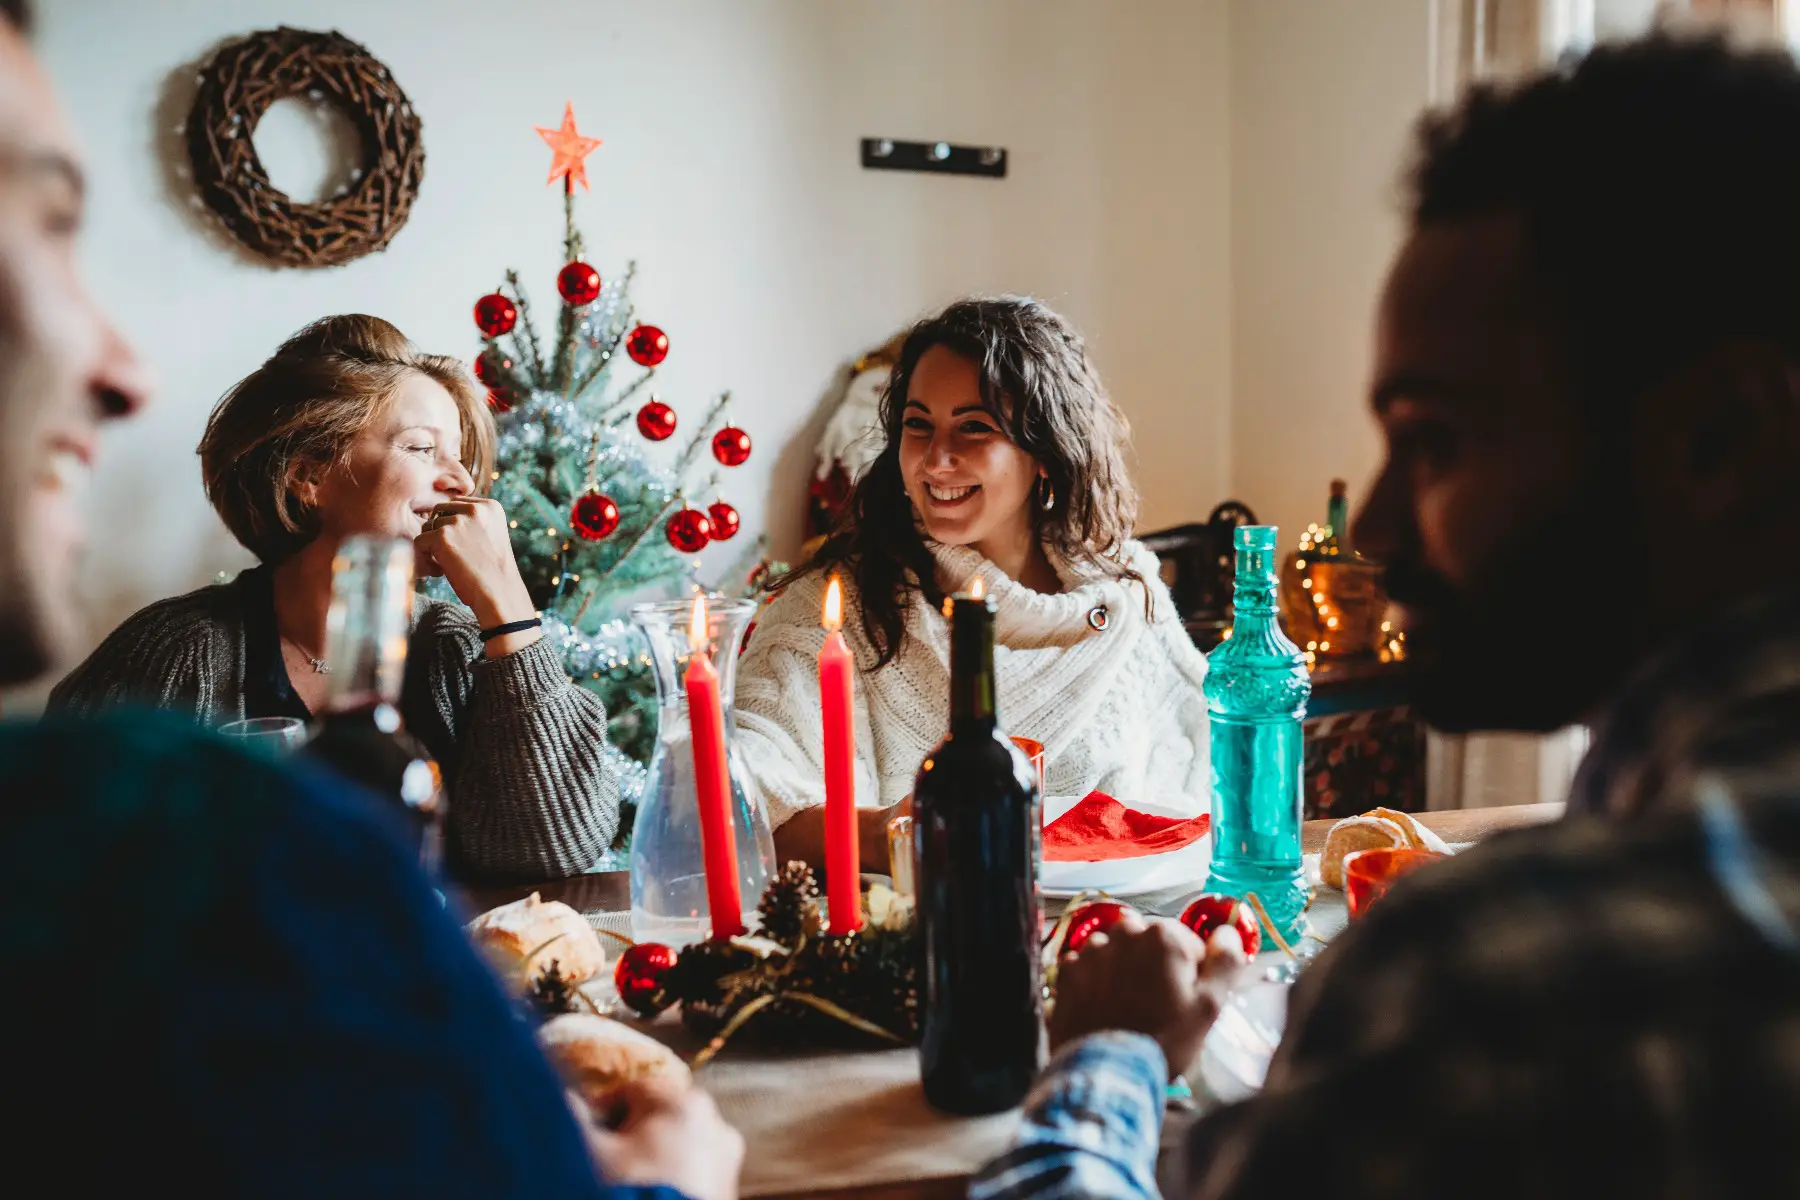 Happy family having Christmas lunch together. In the foreground, there is a silhouette of two men talking. The photo is focused on two women laughing.